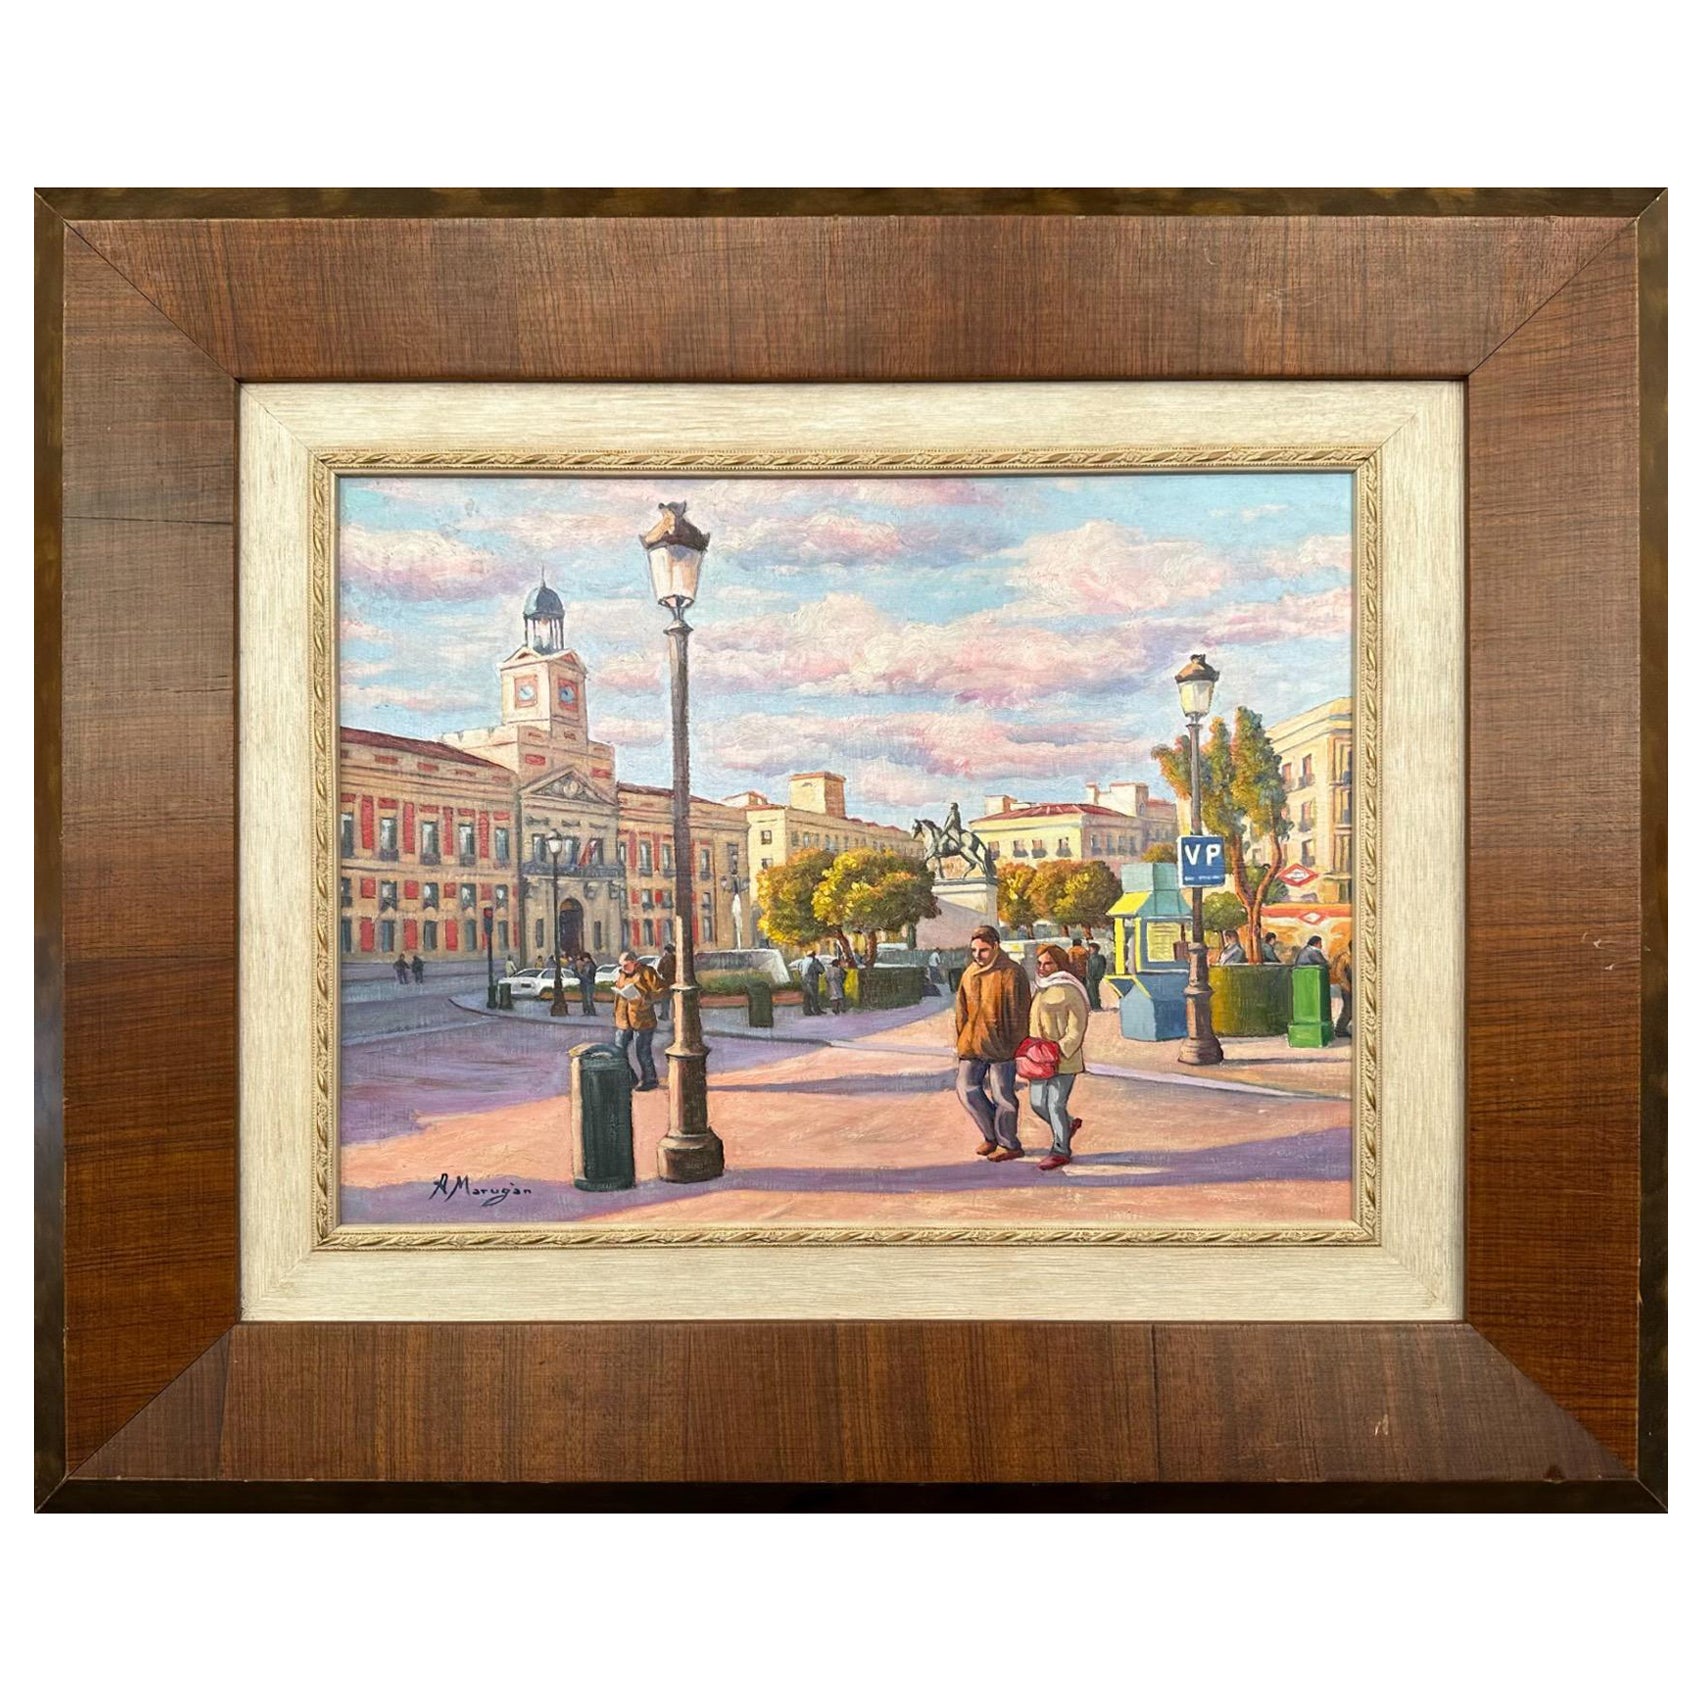 Italian or Spanish City Oil Painting in Sunset